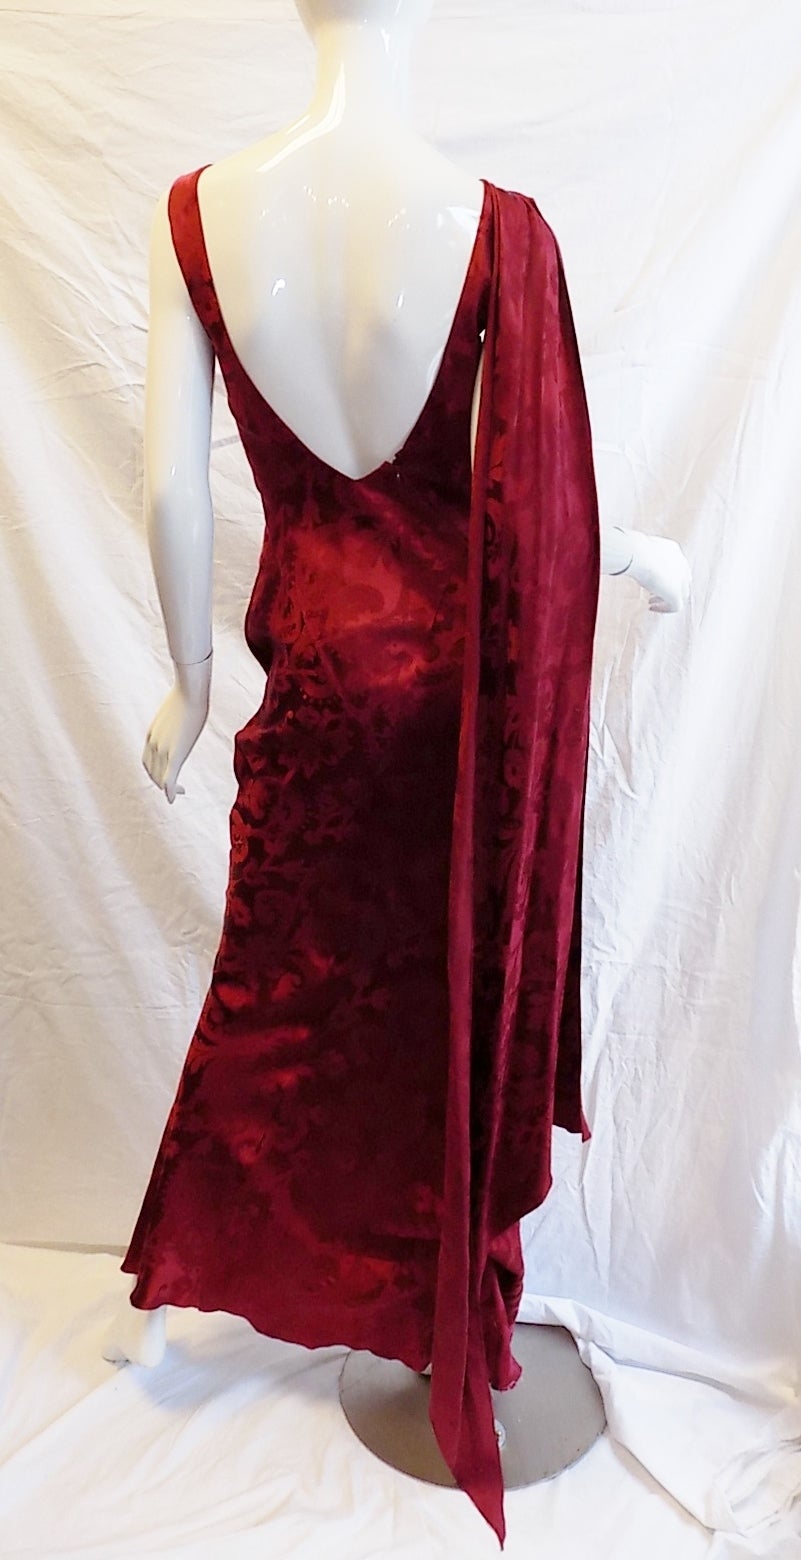 Printed silk new with tag Christian Dior vintage gown  featuring: Asymmetrical front cutouts , front deep slit, and long one shoulder drape. Retail price is still attached $2445. 
Size 40
bust 36